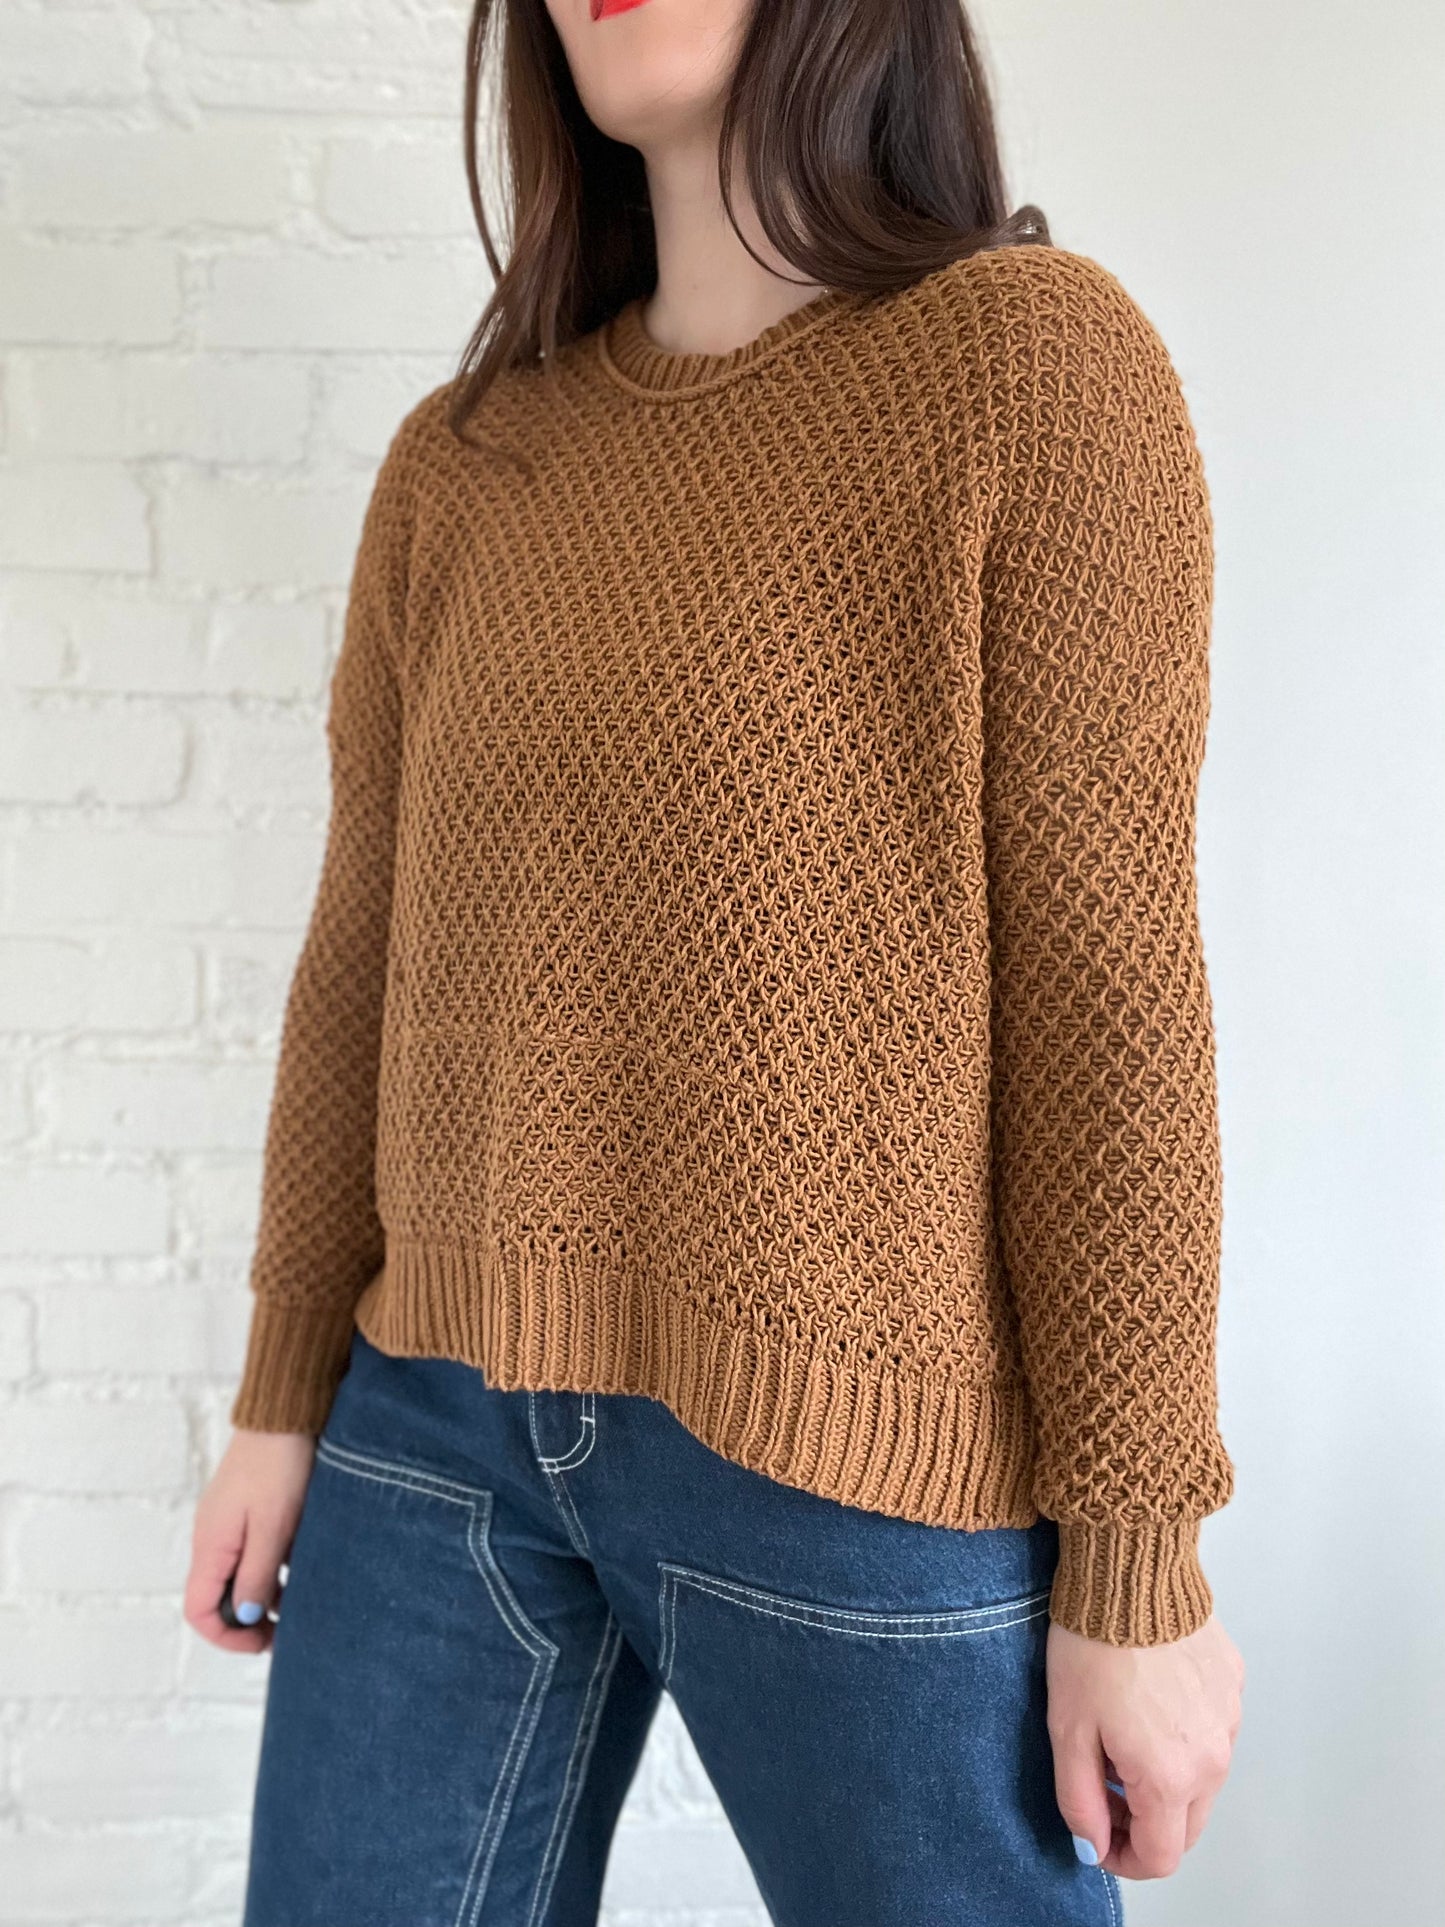 Madwell Netted Copper Sweater - S